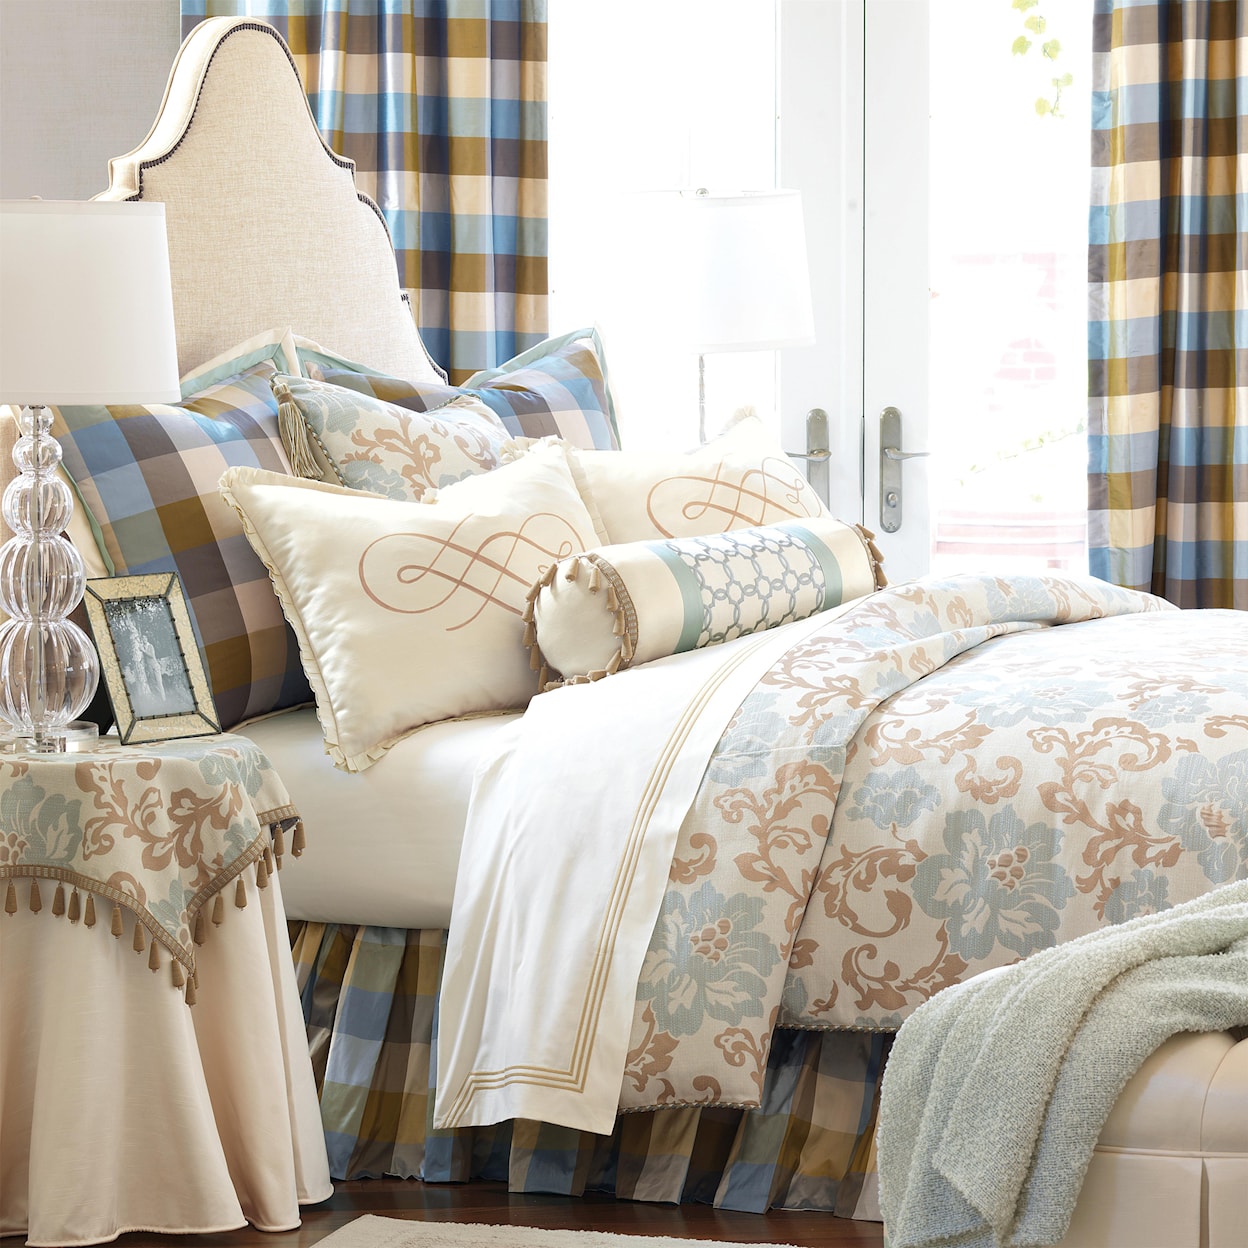 Eastern Accents Kinsey King Bedset